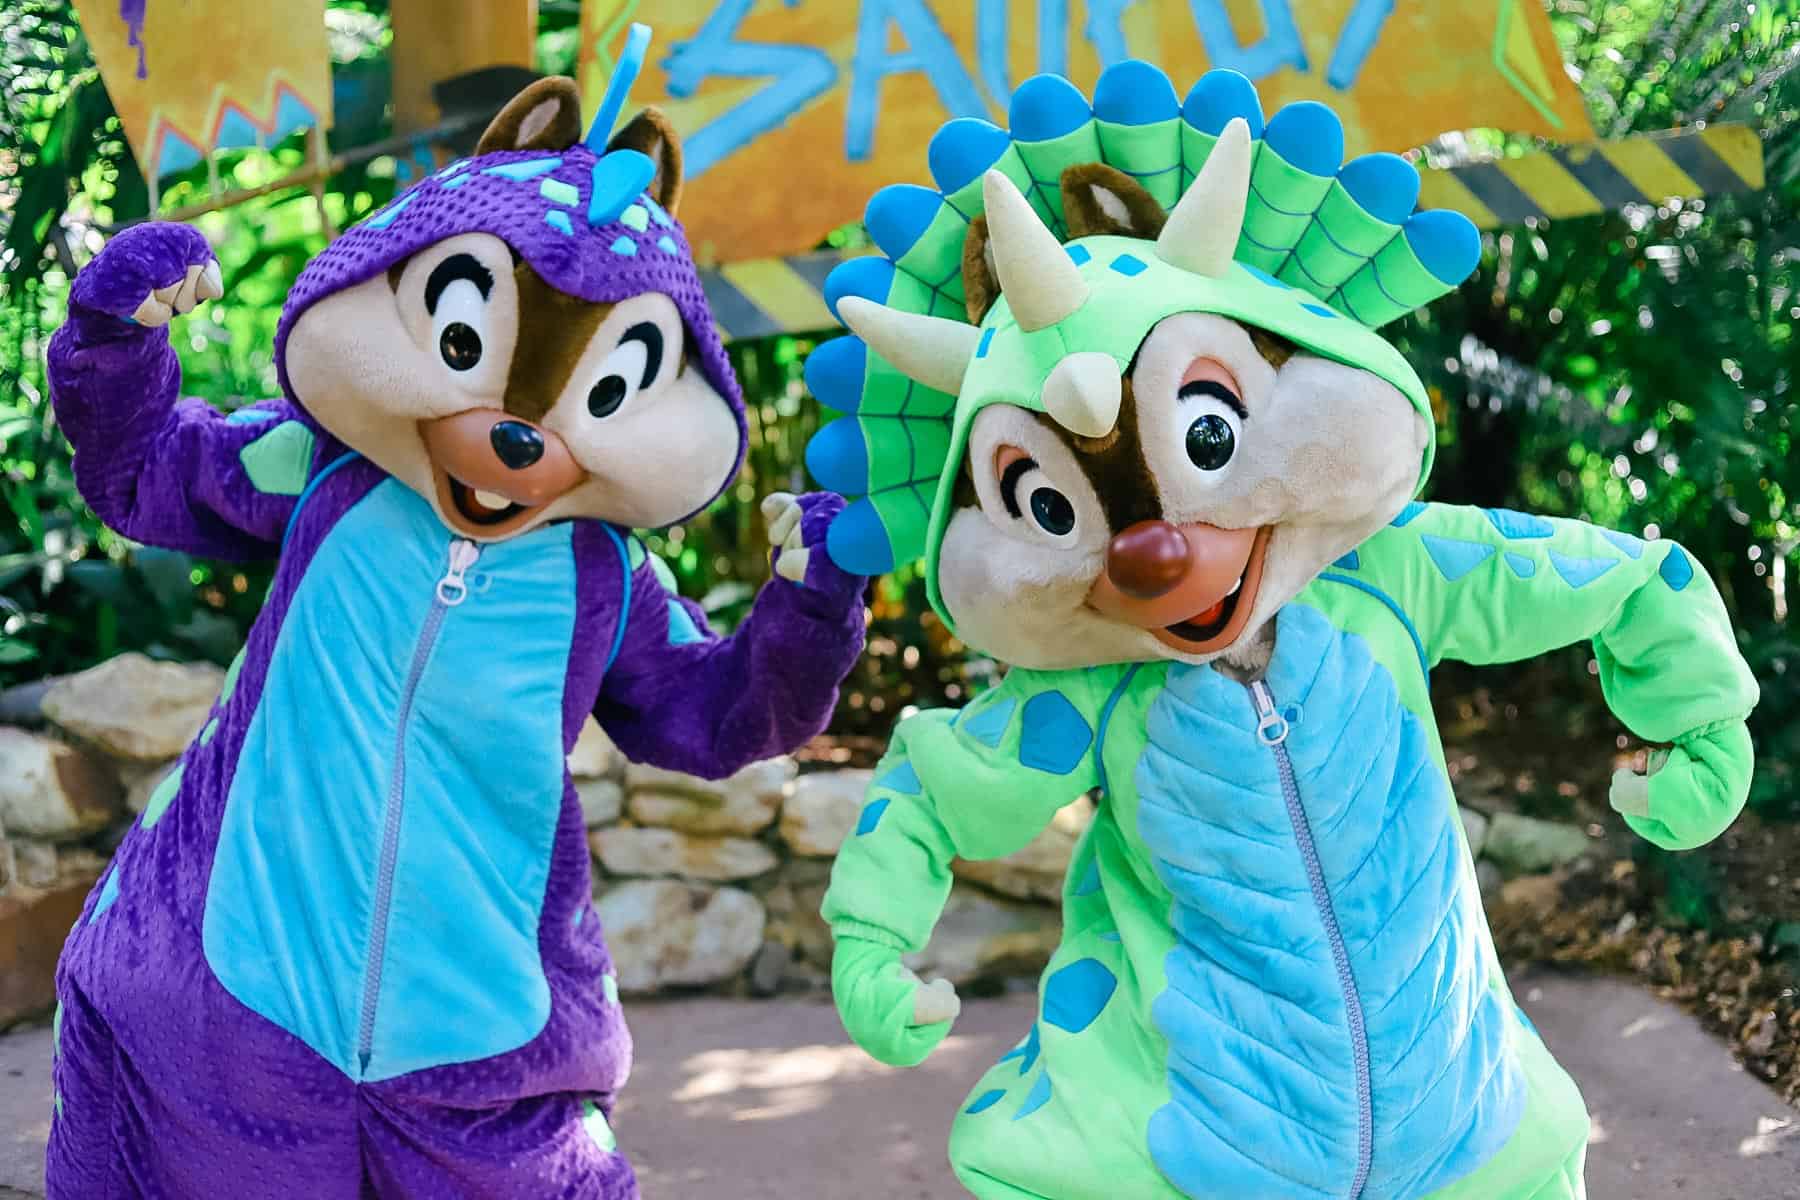 Chip is wearing a purple dinosaur costume and Dale is wearing a green dinosaur costume. 